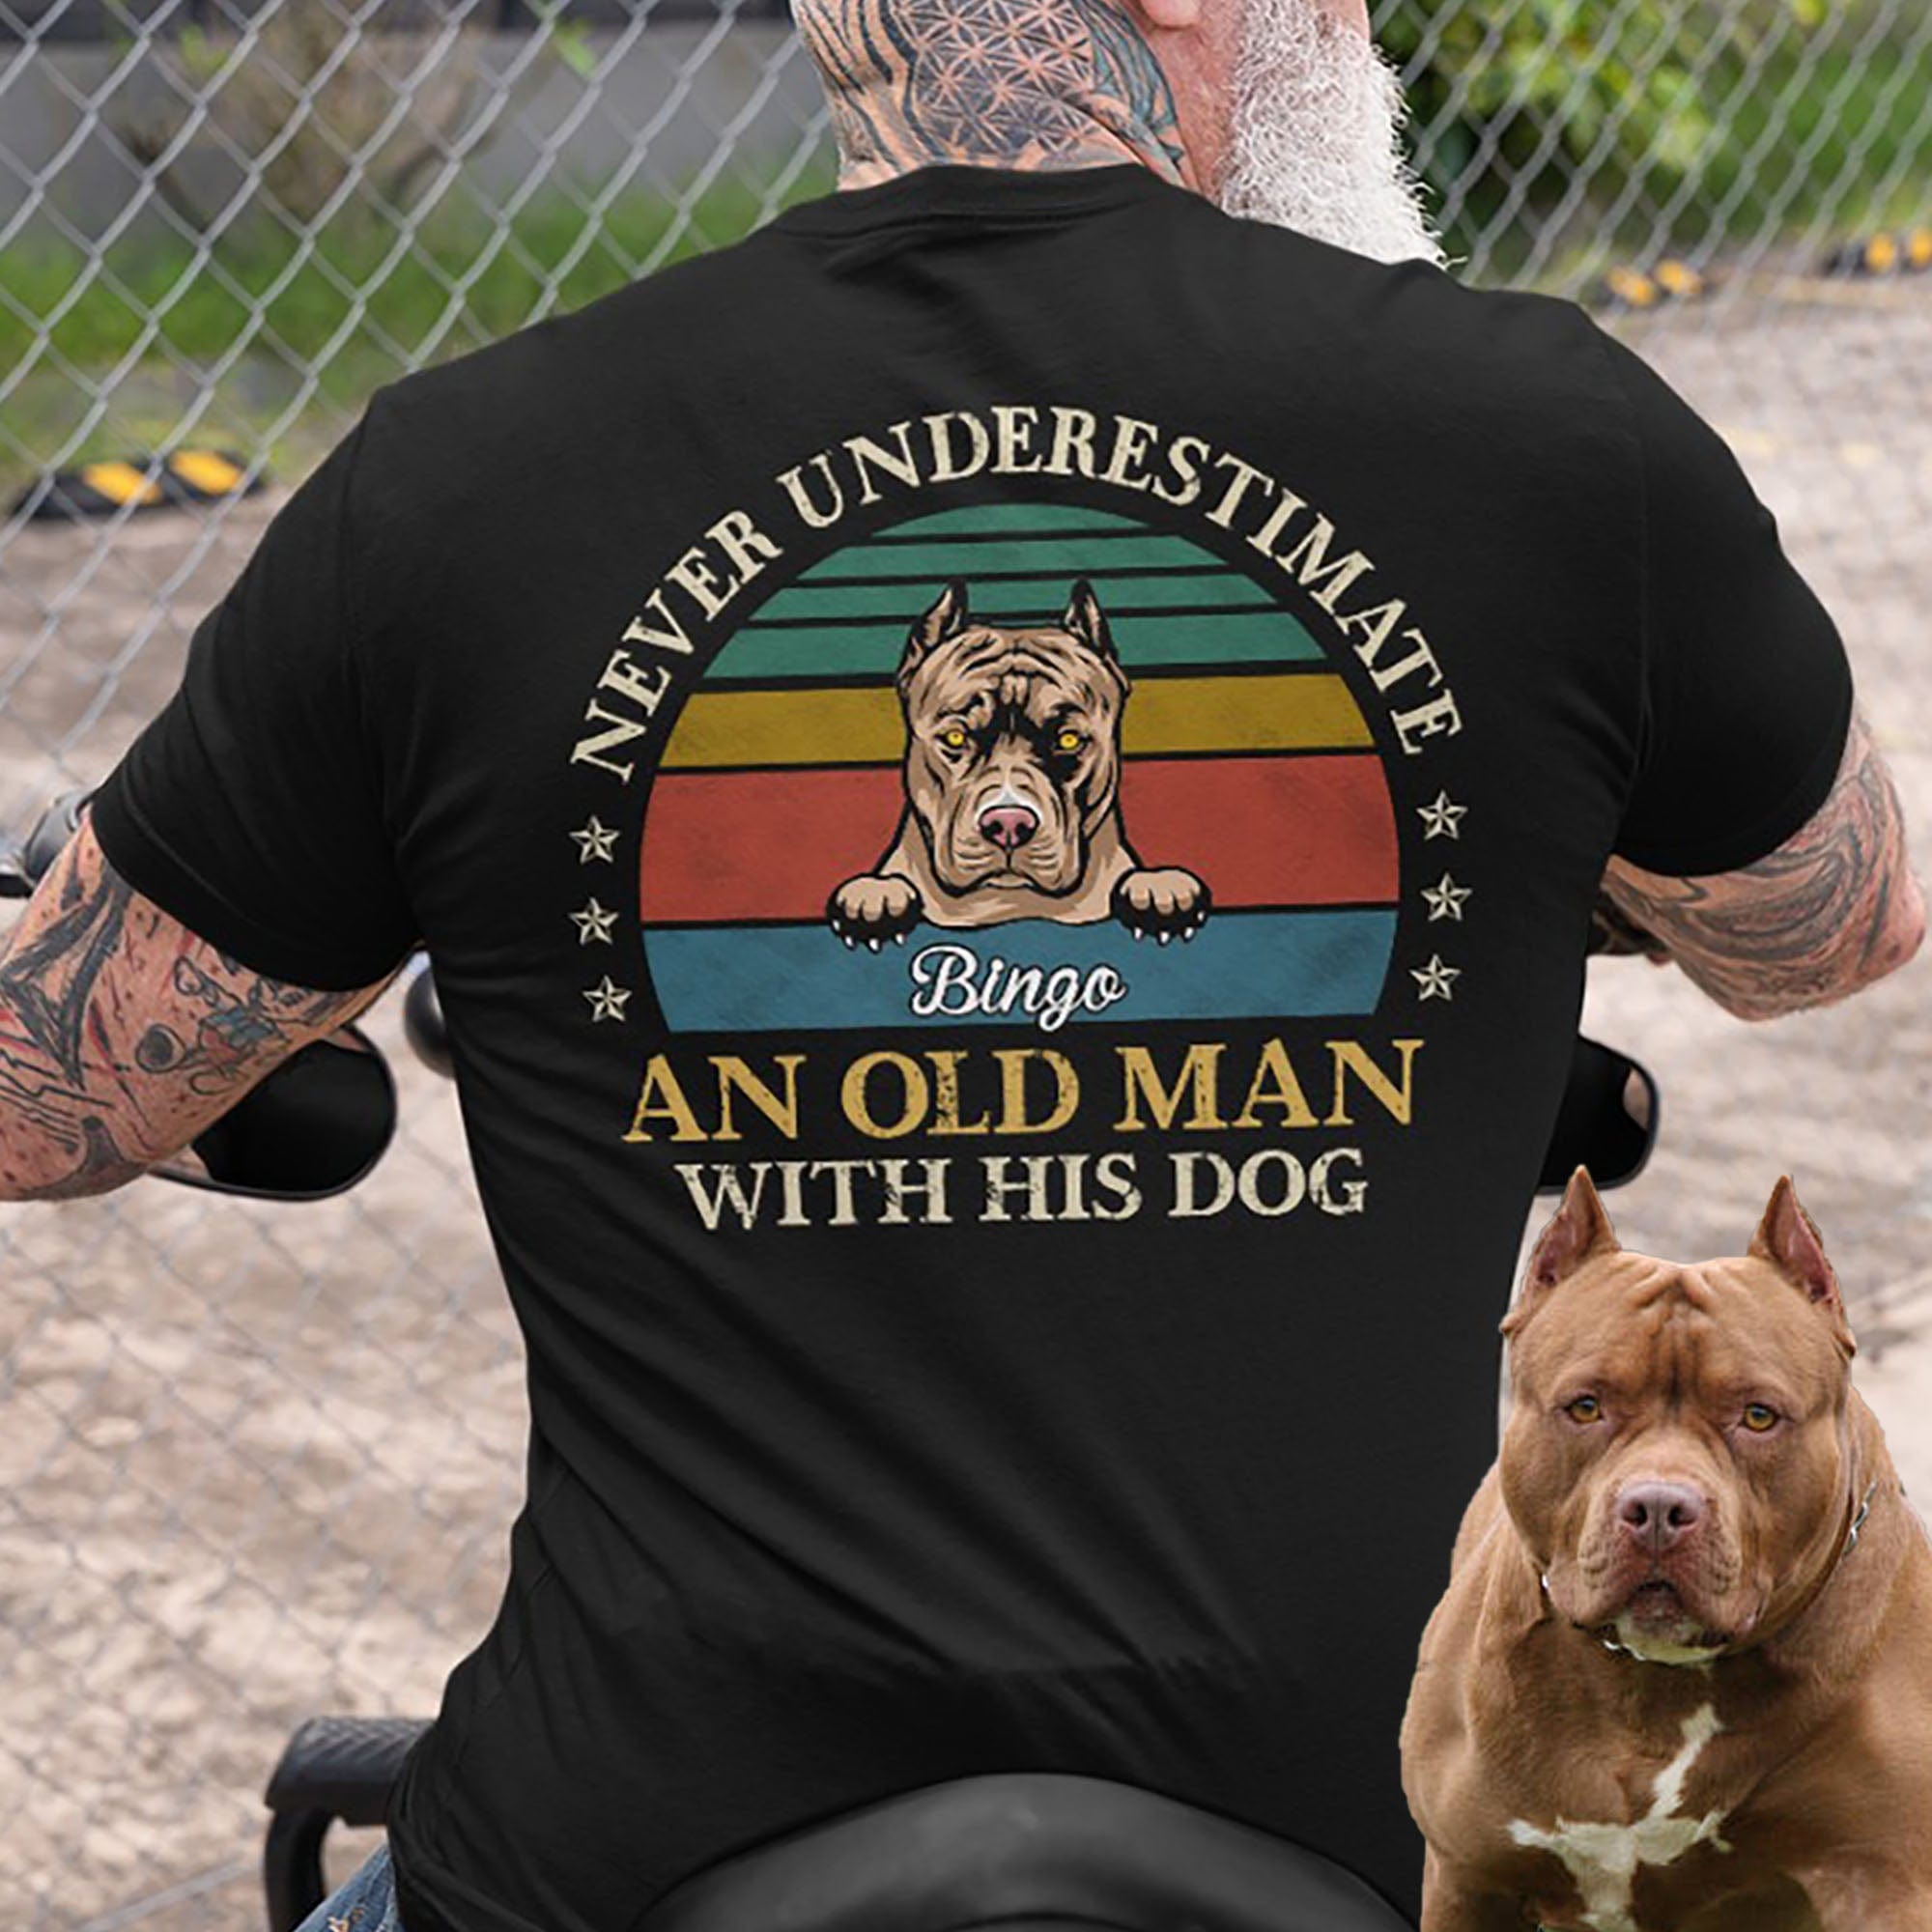 GeckoCustom Never Underestimate An Old Man With His Dog Personalized Custom Dog Backside Shirt C419 Premium Tee (Favorite) / P Black / S